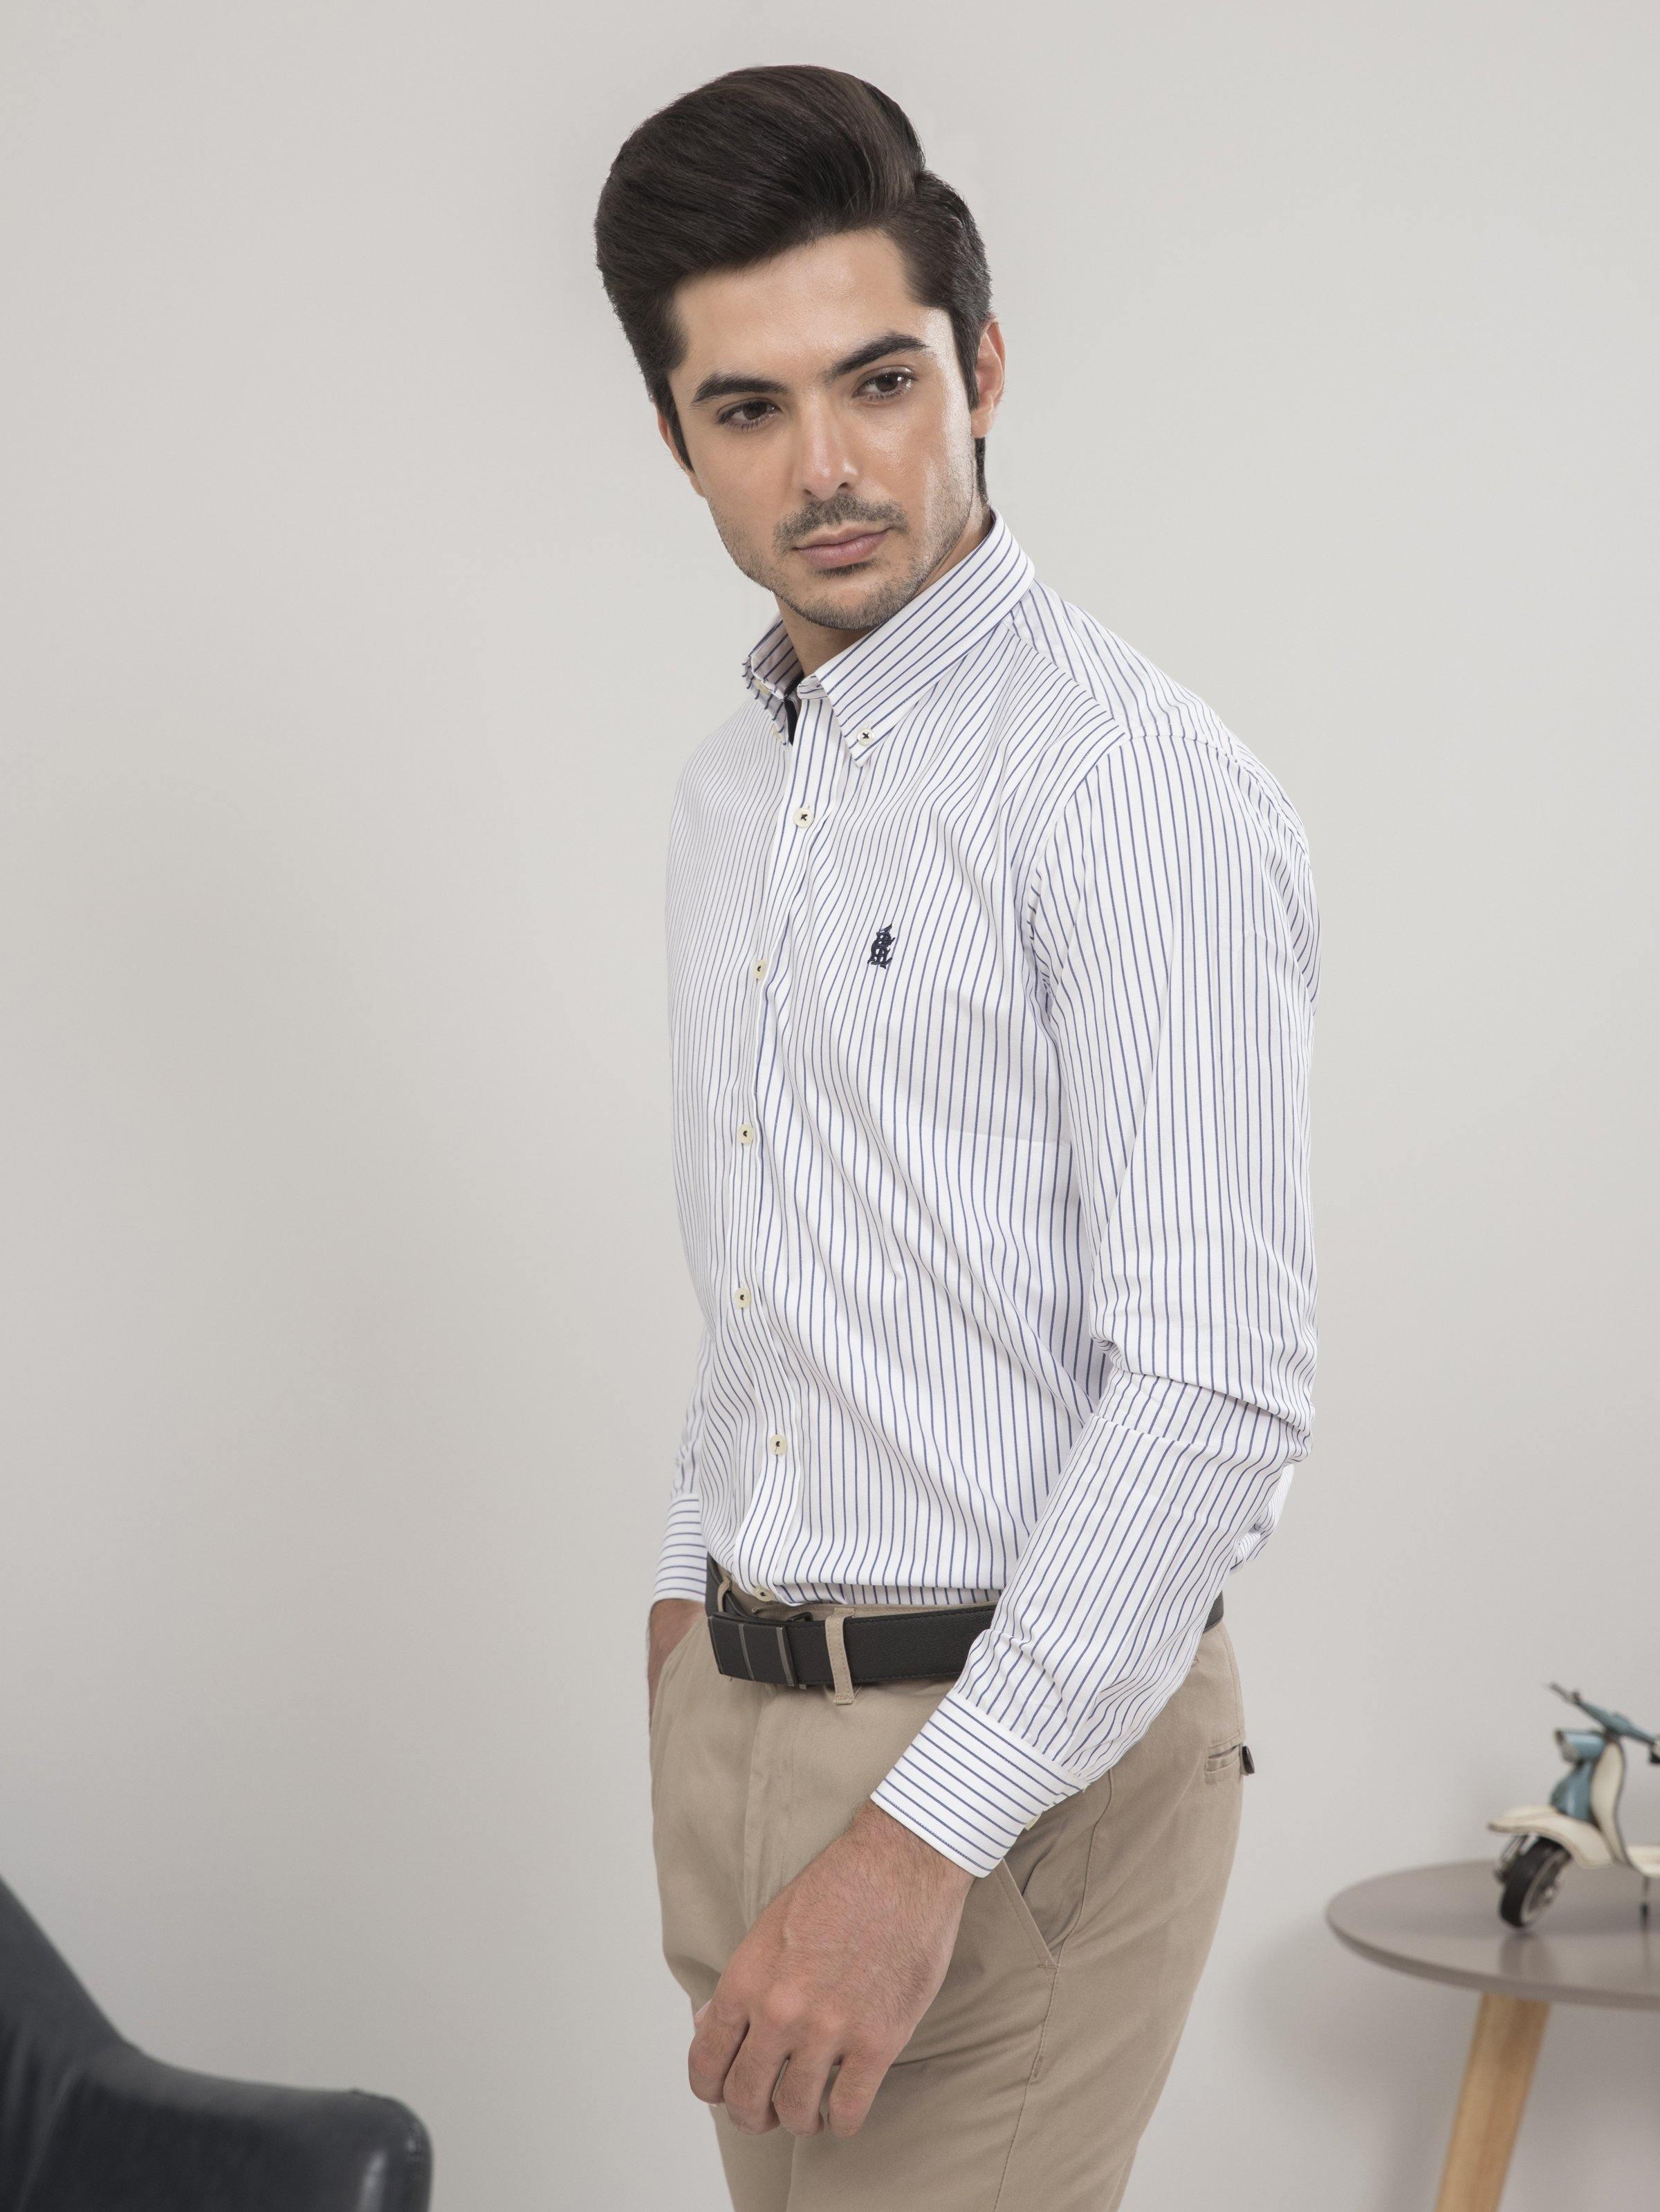 SEMI FORMAL FULL SLEEVES WHITE DENIM LINING at Charcoal Clothing